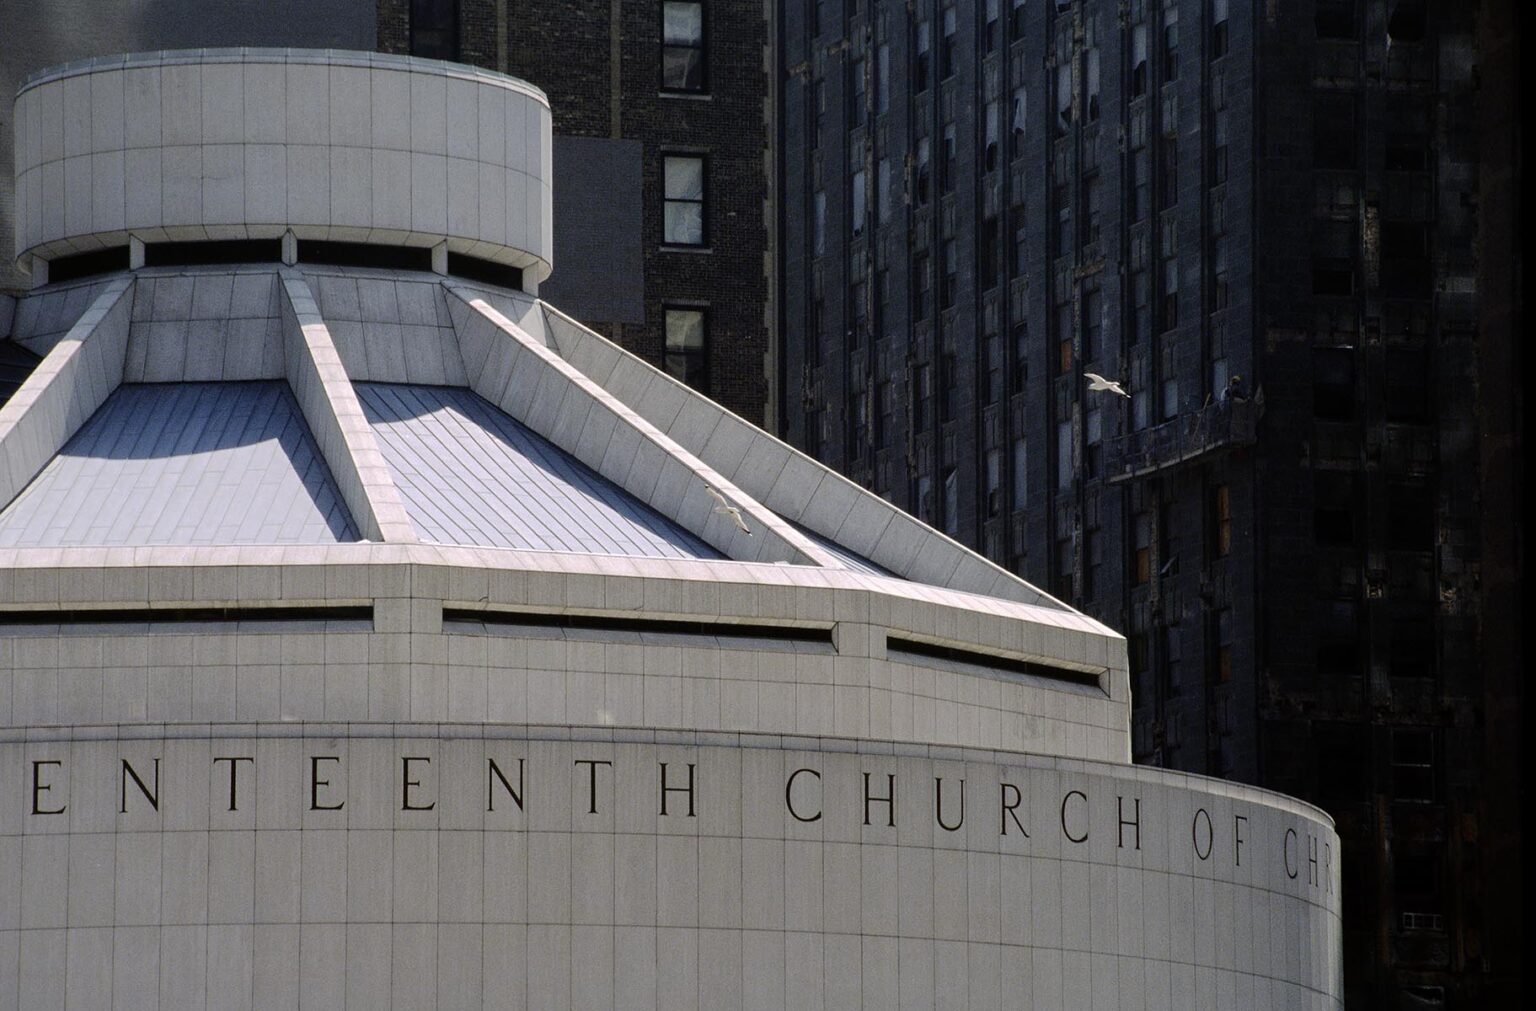 A cylindrical SEVENTEENTH CHURCH of CHRIST, SCIENTIST - CHICAGO, ILLINOIS